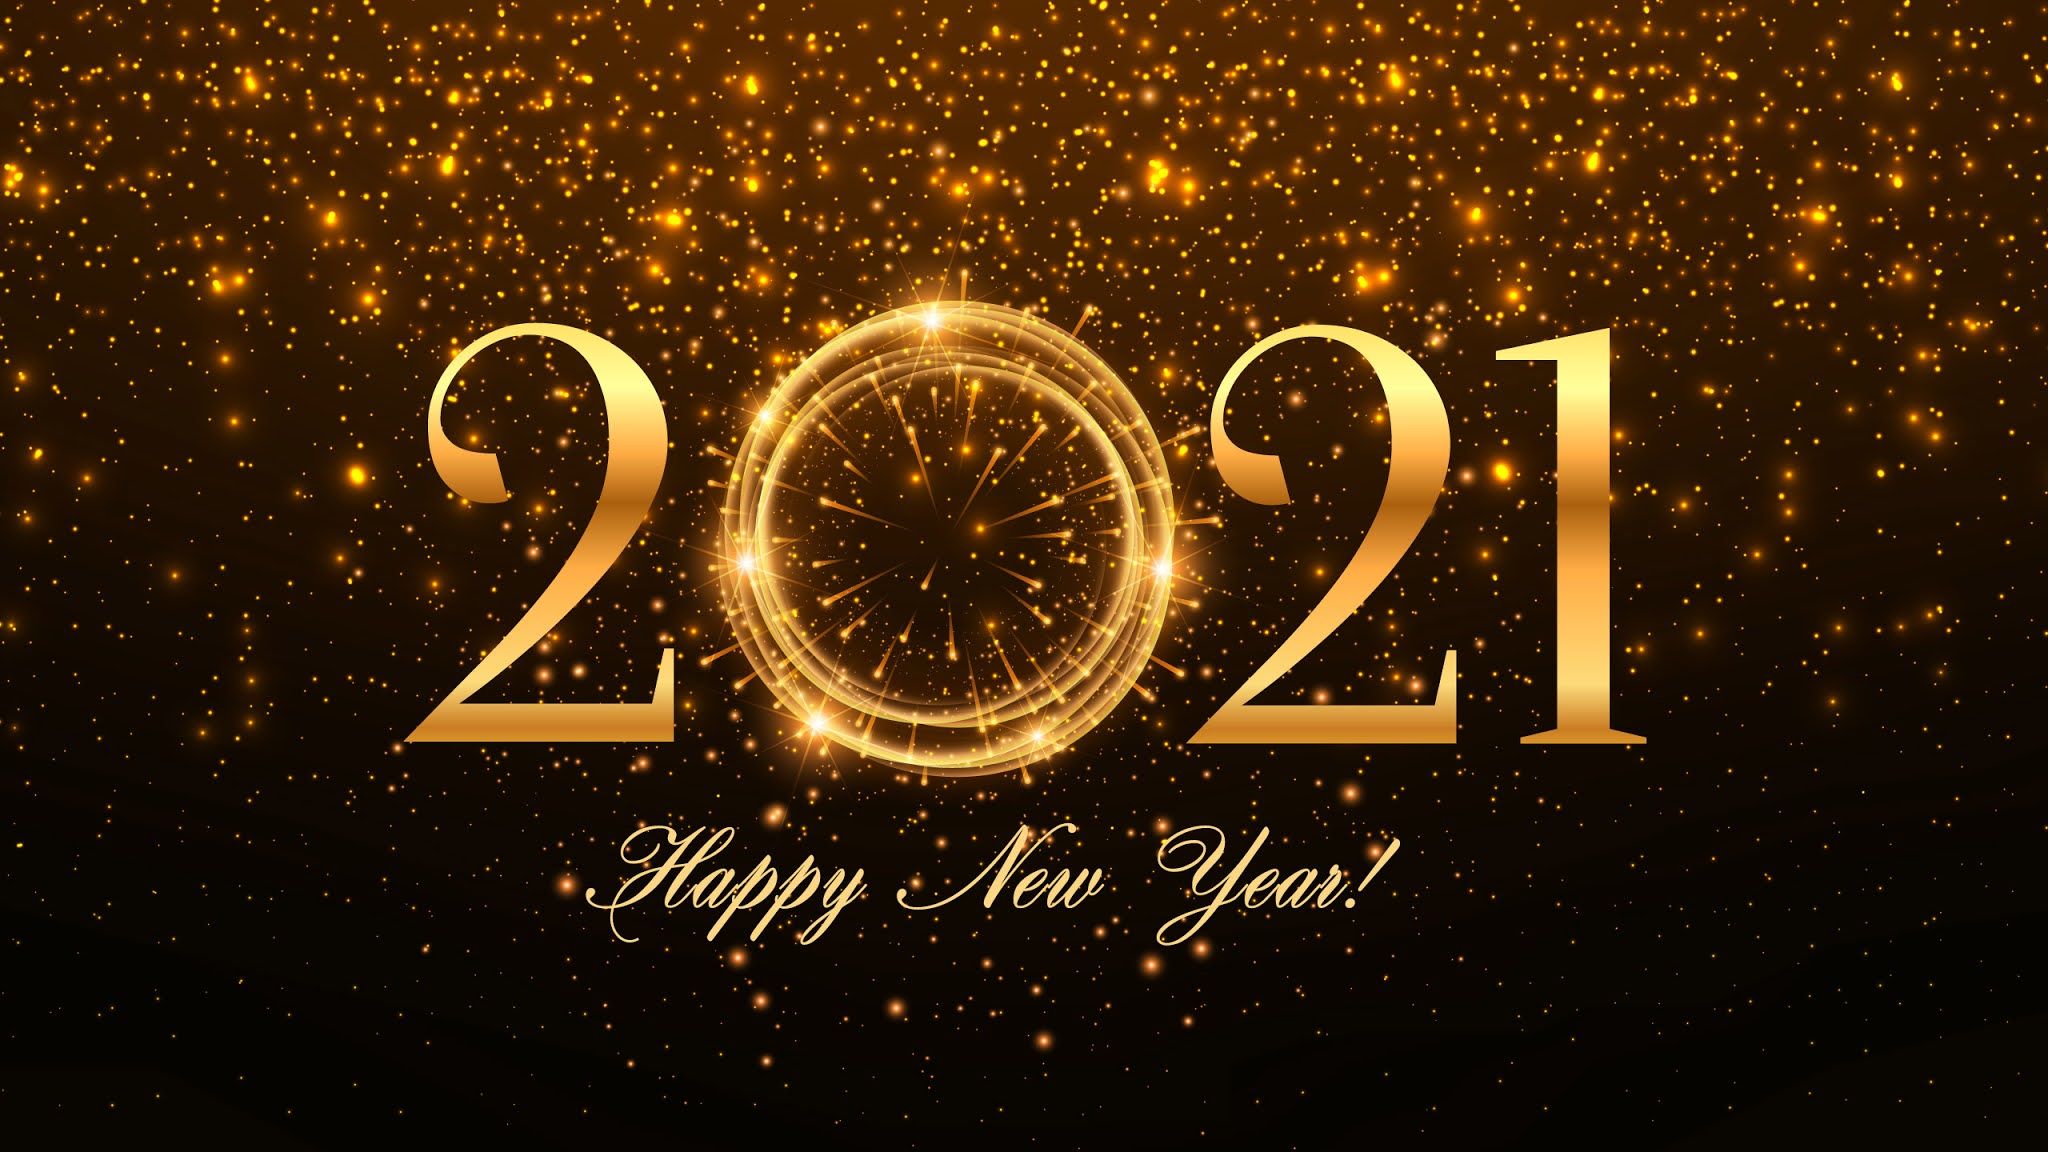 Download - Happy New Year 4k Images, HD Wallpapers 